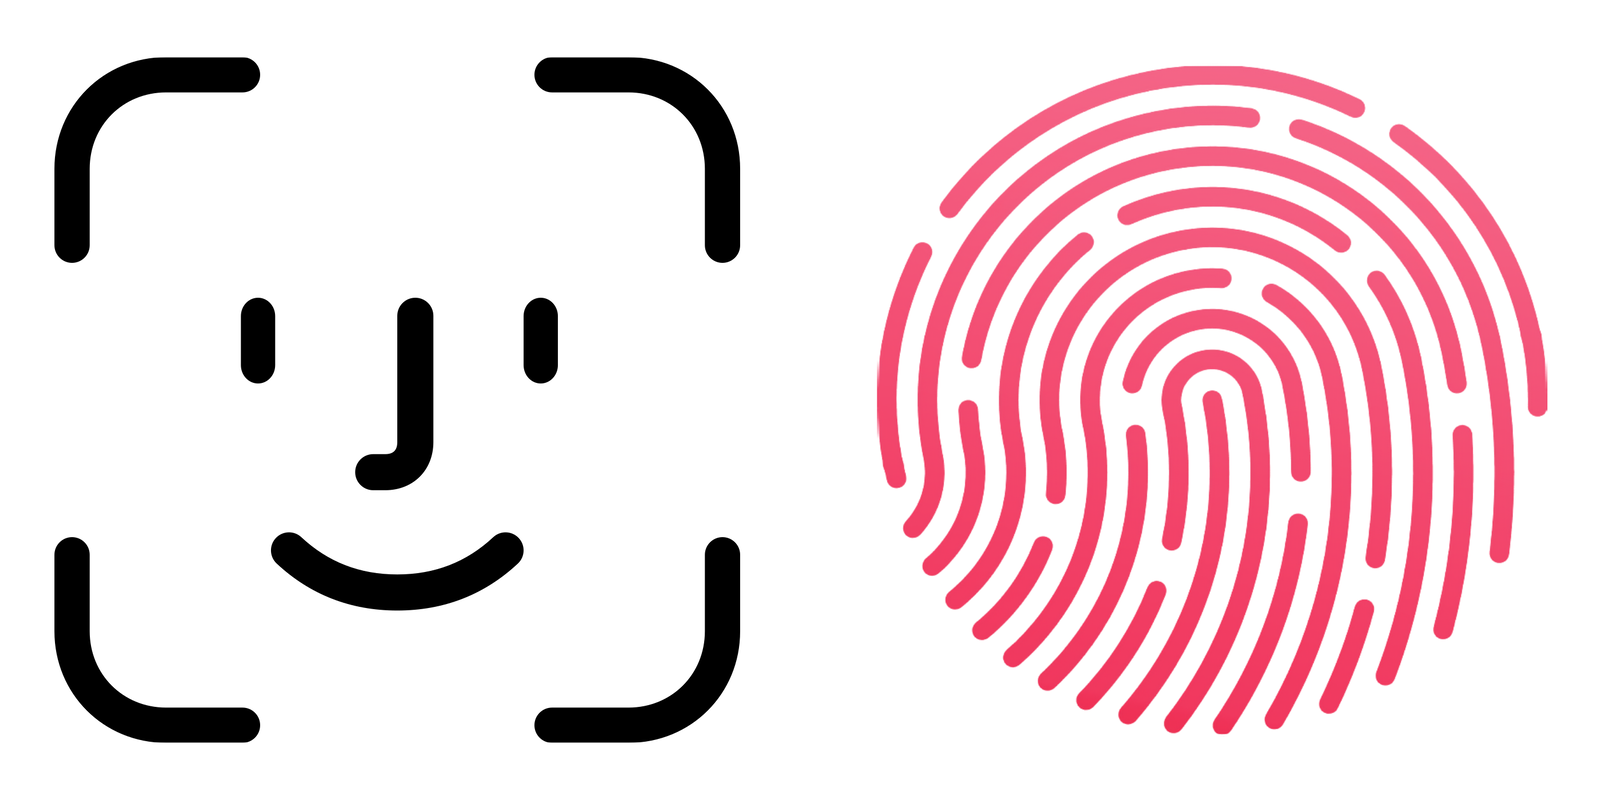 Which Is More Secure: Face ID, Touch ID, or a Passcode? - The Mac Security Blog